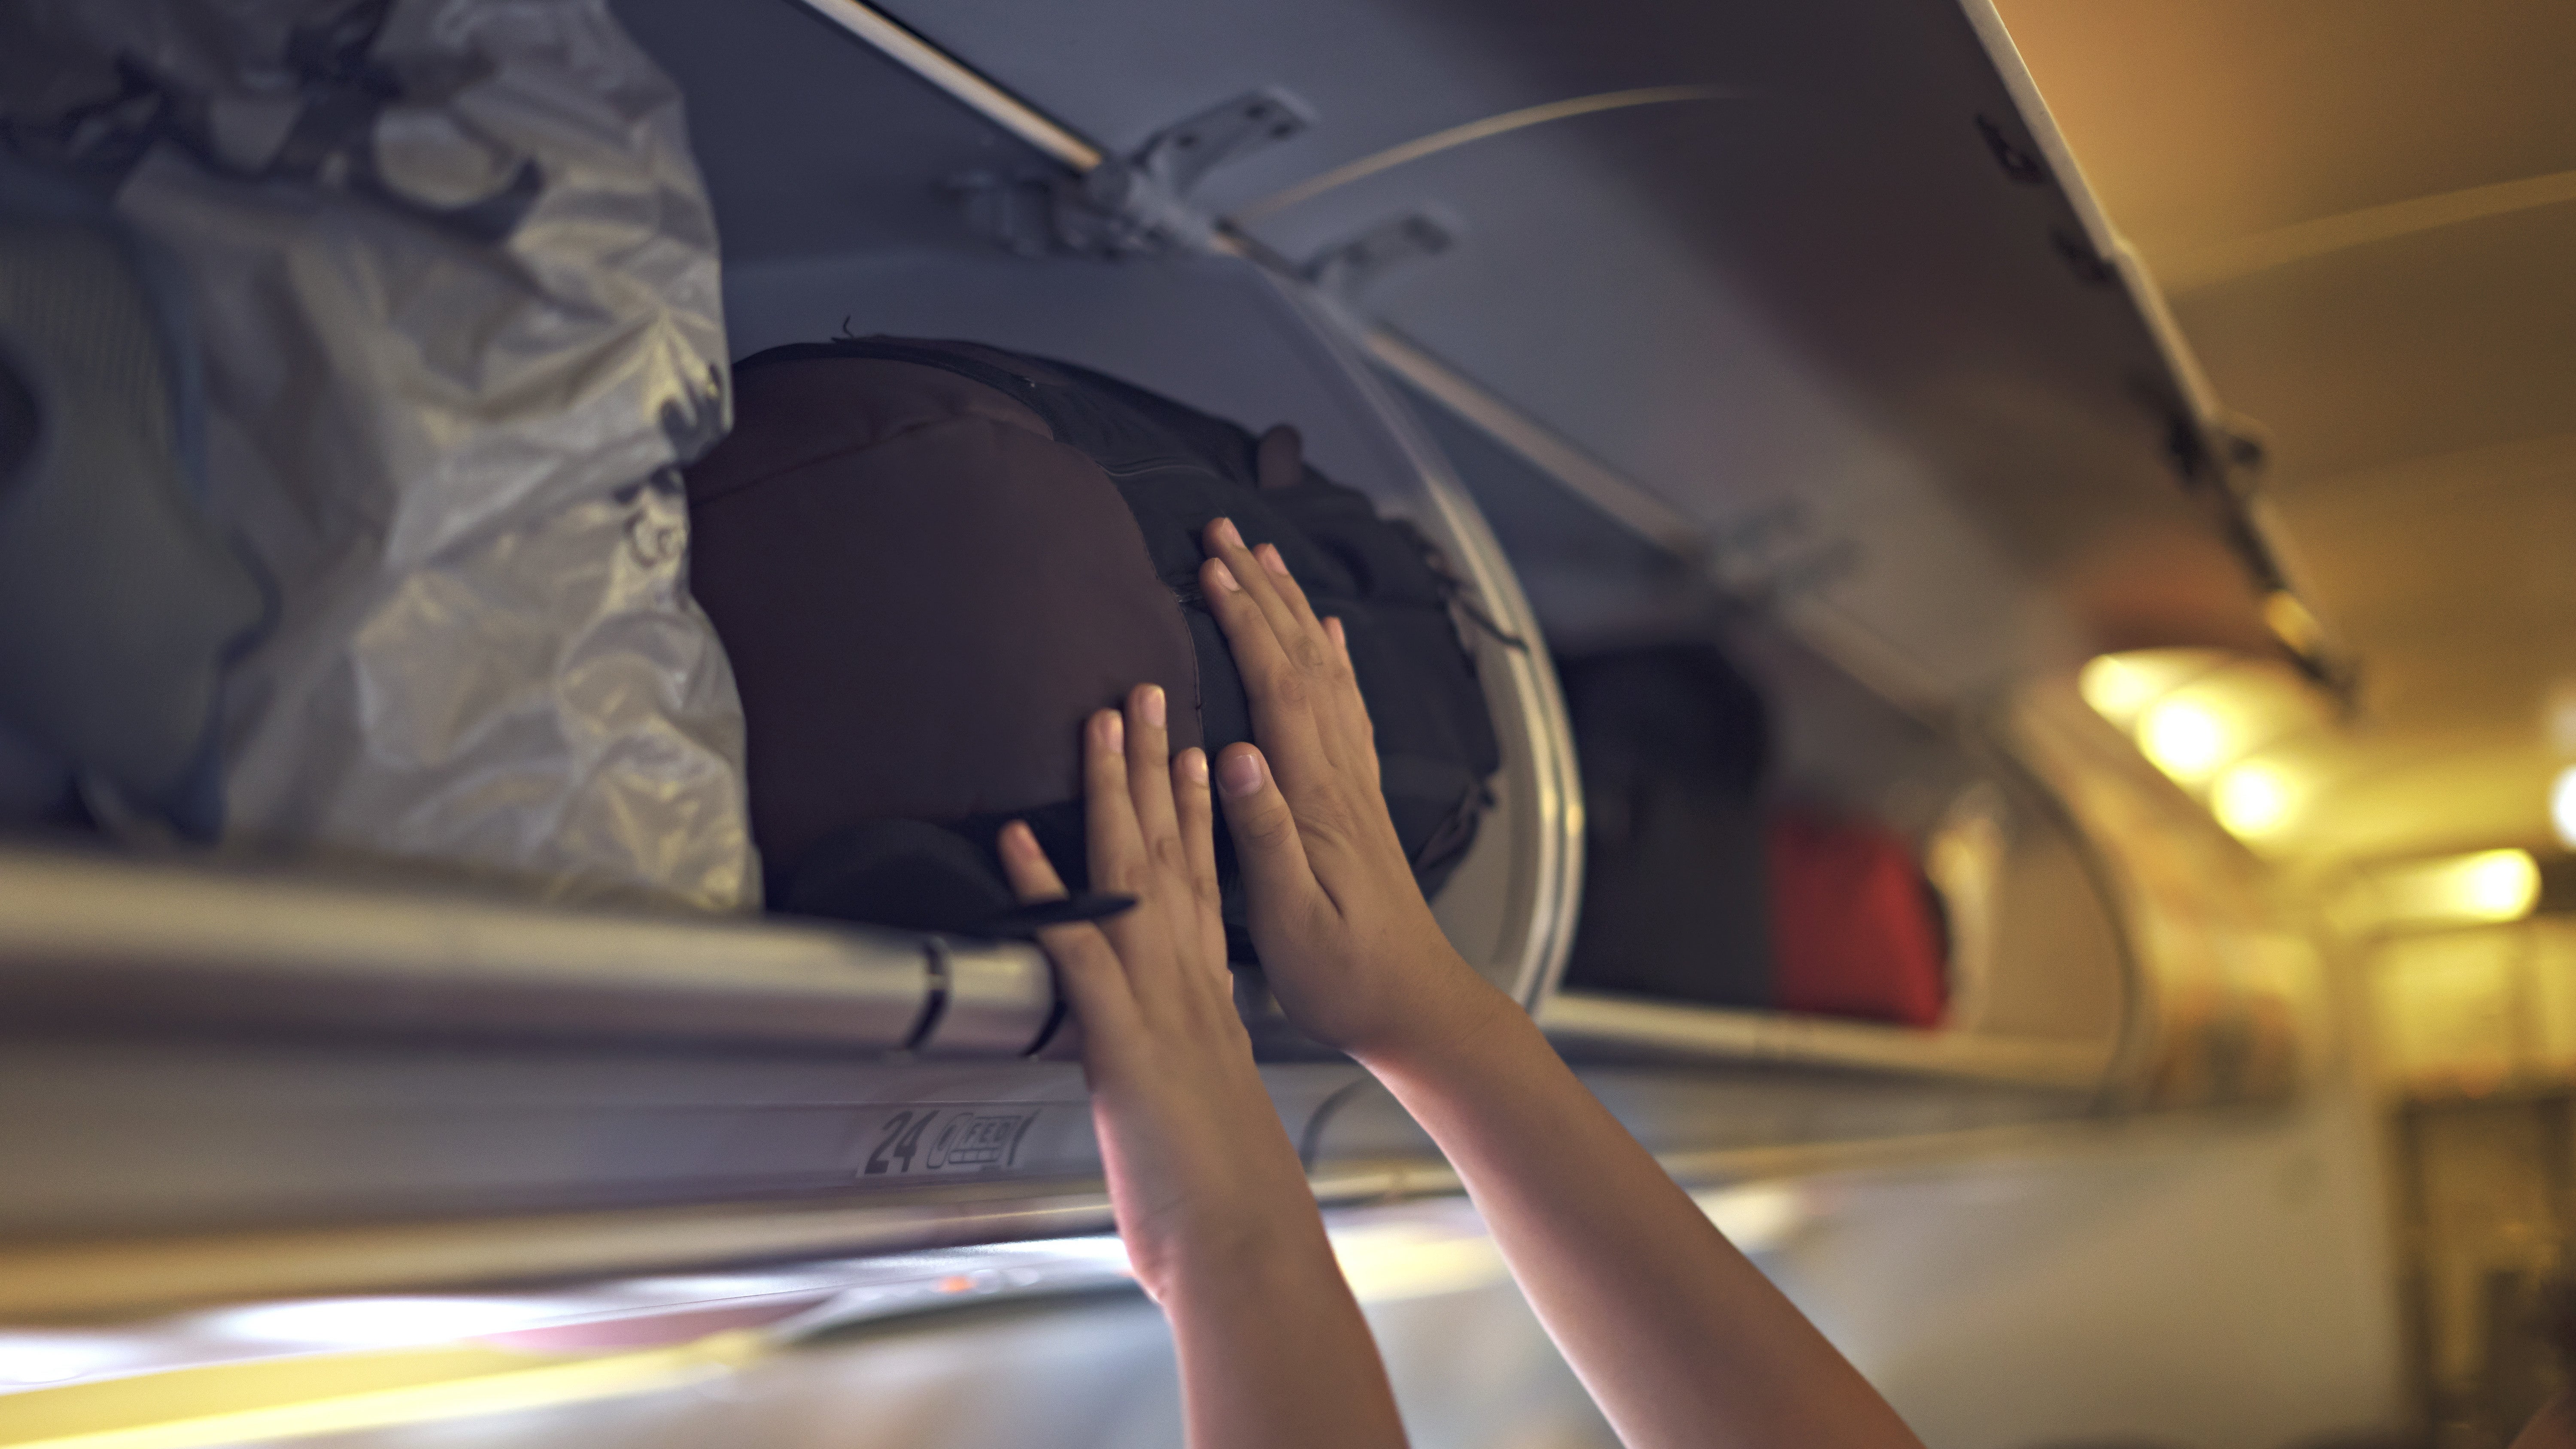 Can You Call Dibs On Overhead Space On A Flight?